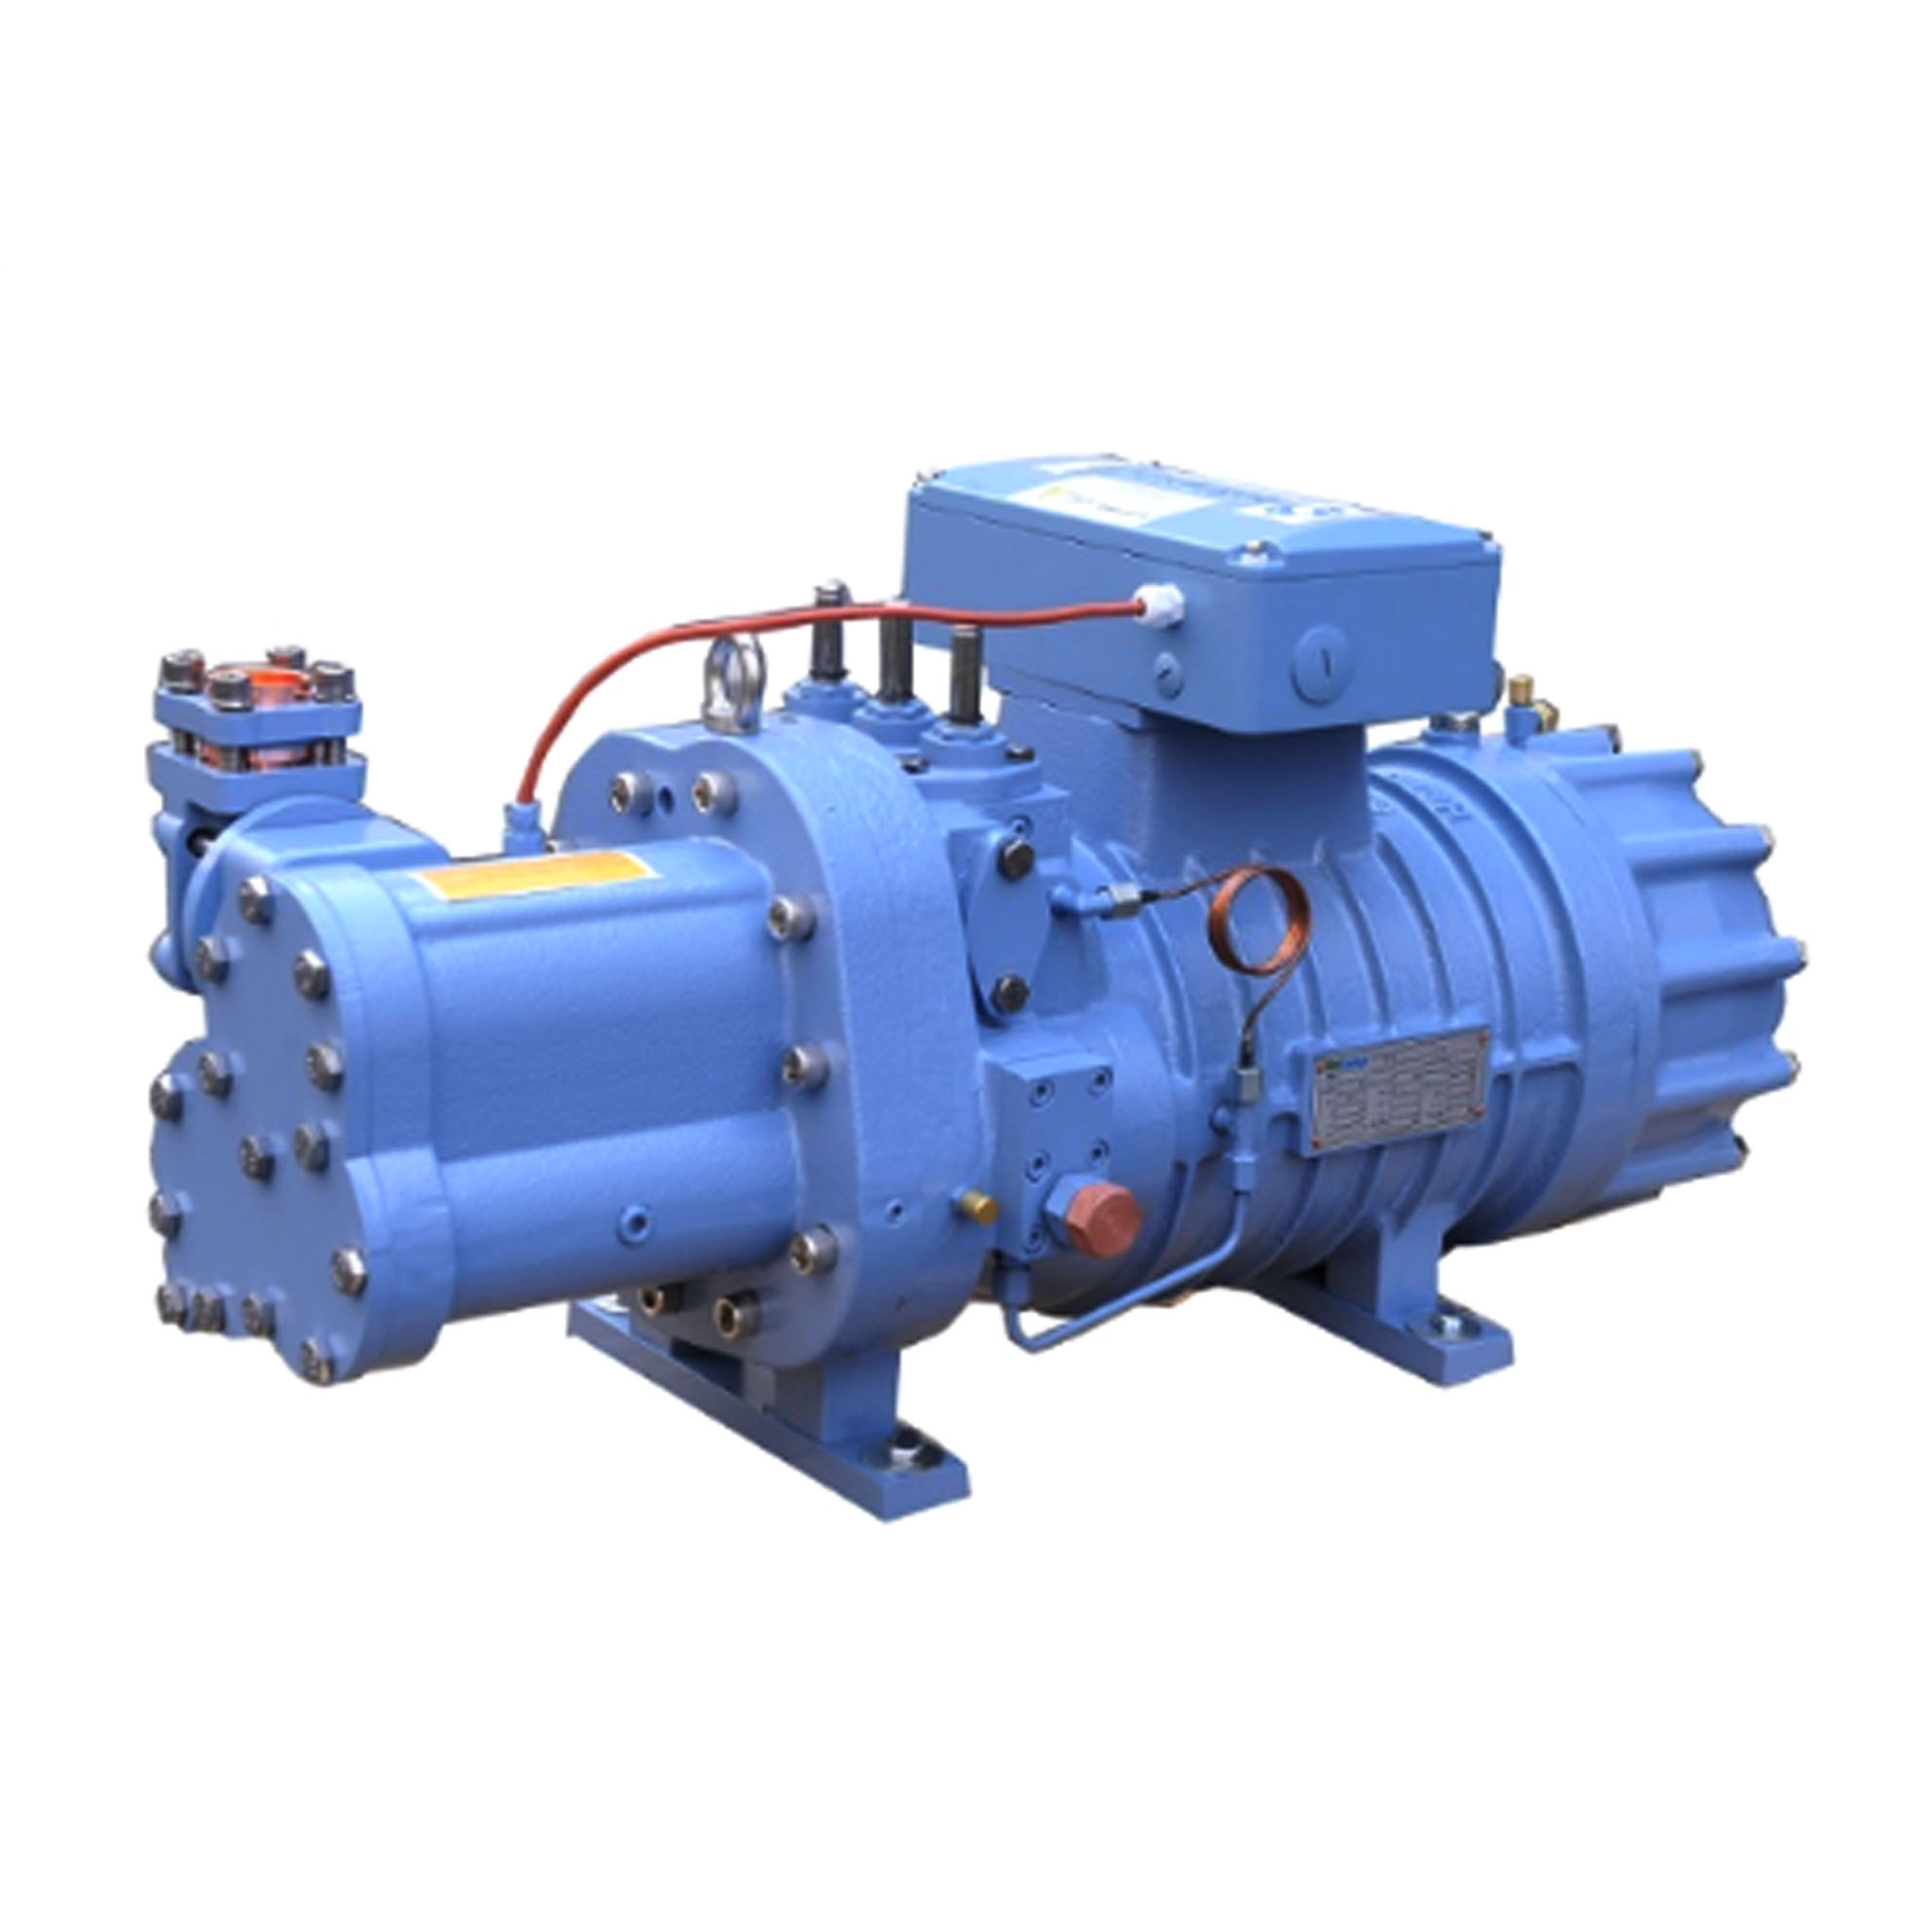 China Supplier Semi-Hermetic Reciprocating Compressor -
 RefComp semi-hermetic screw compressor SW series for refrigeration – Hengyi